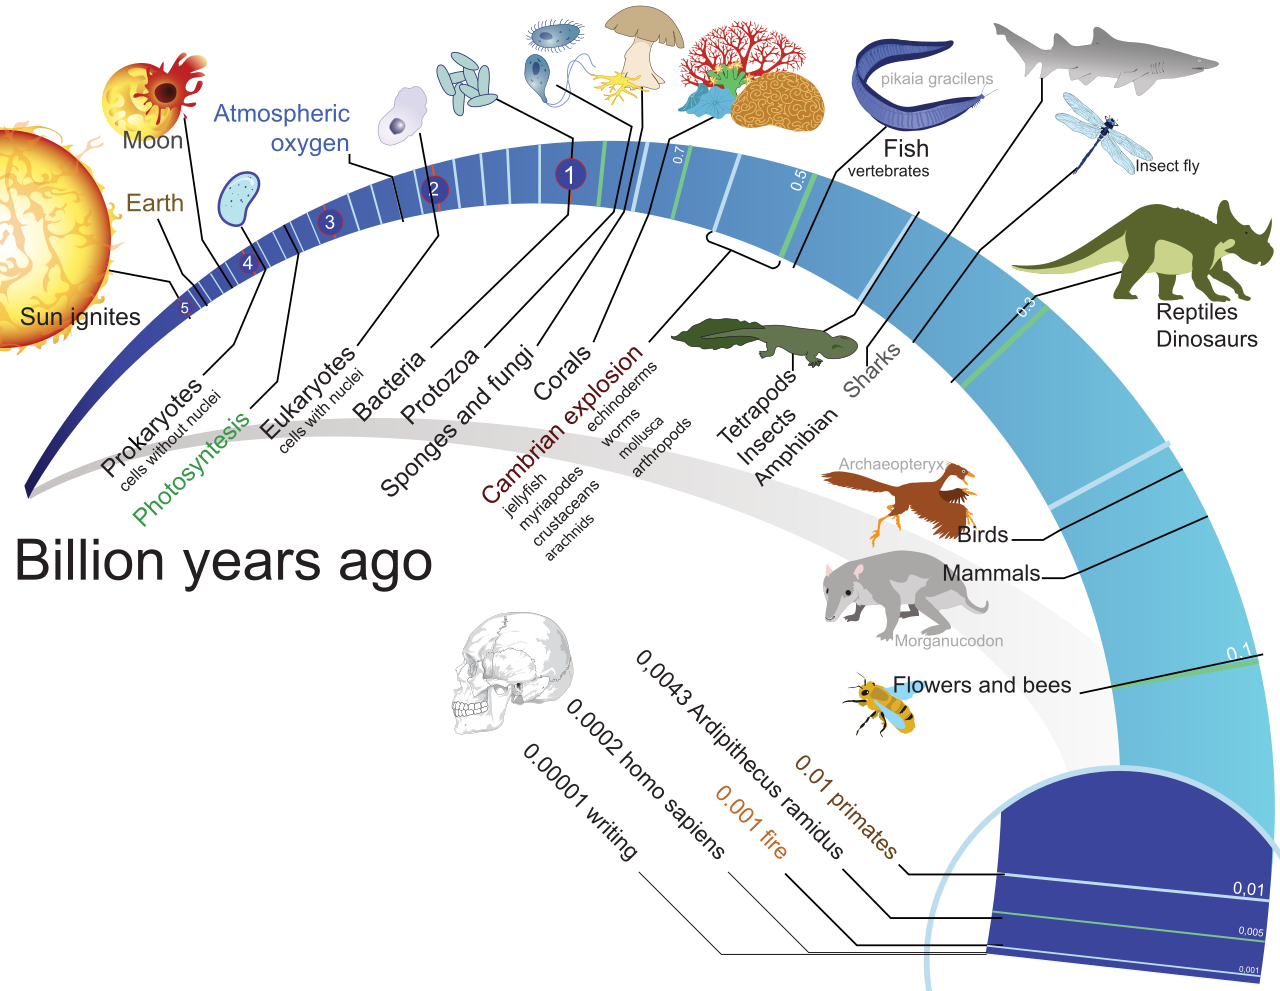 File:Timeline evolution of  - Wikimedia Commons